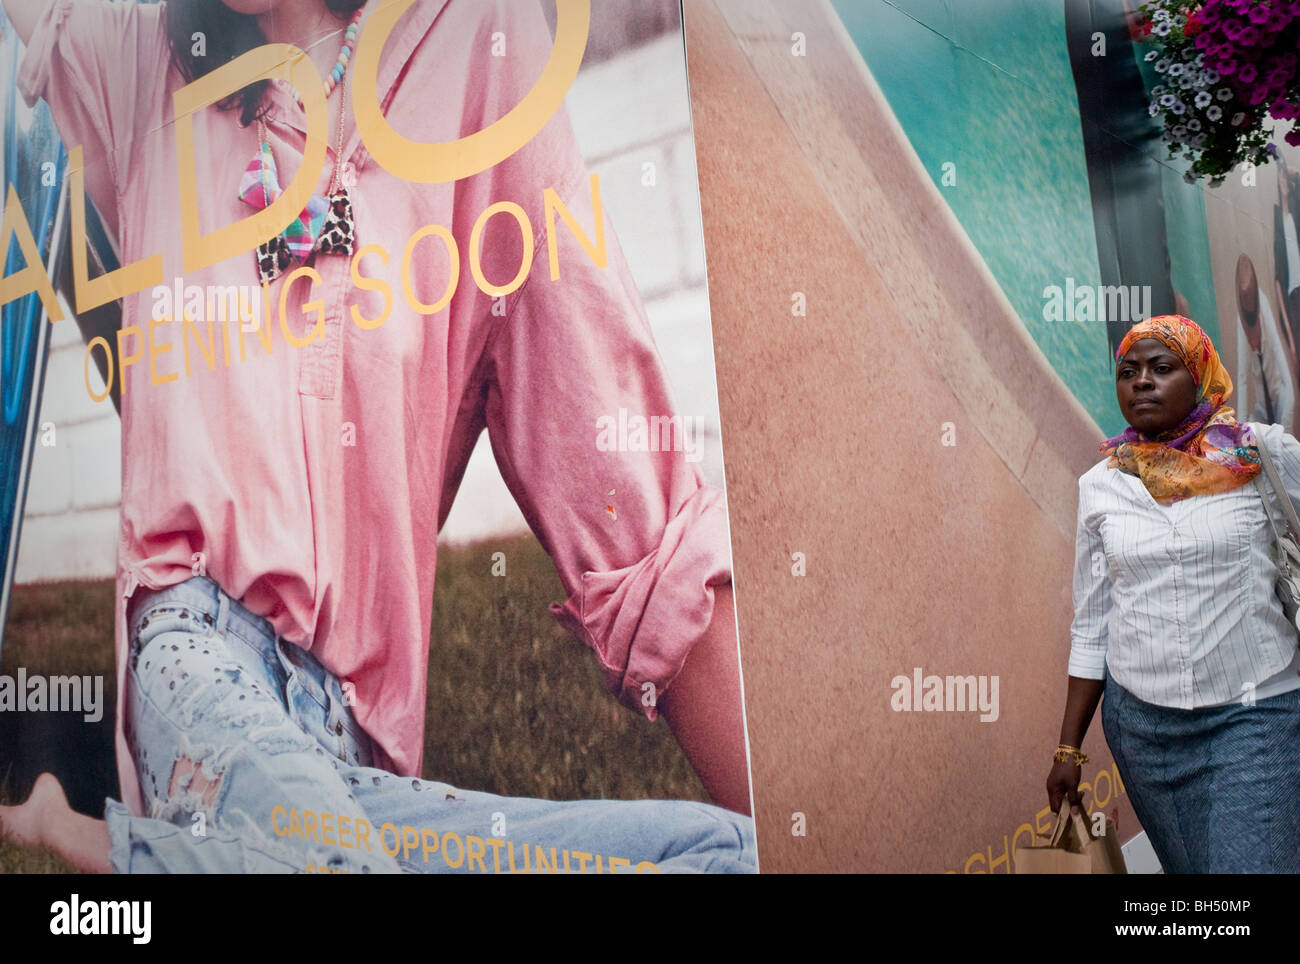 African Muslim woman walking past an advertising hoarding for Aldo Shoes in  Dublin Ireland Stock Photo - Alamy